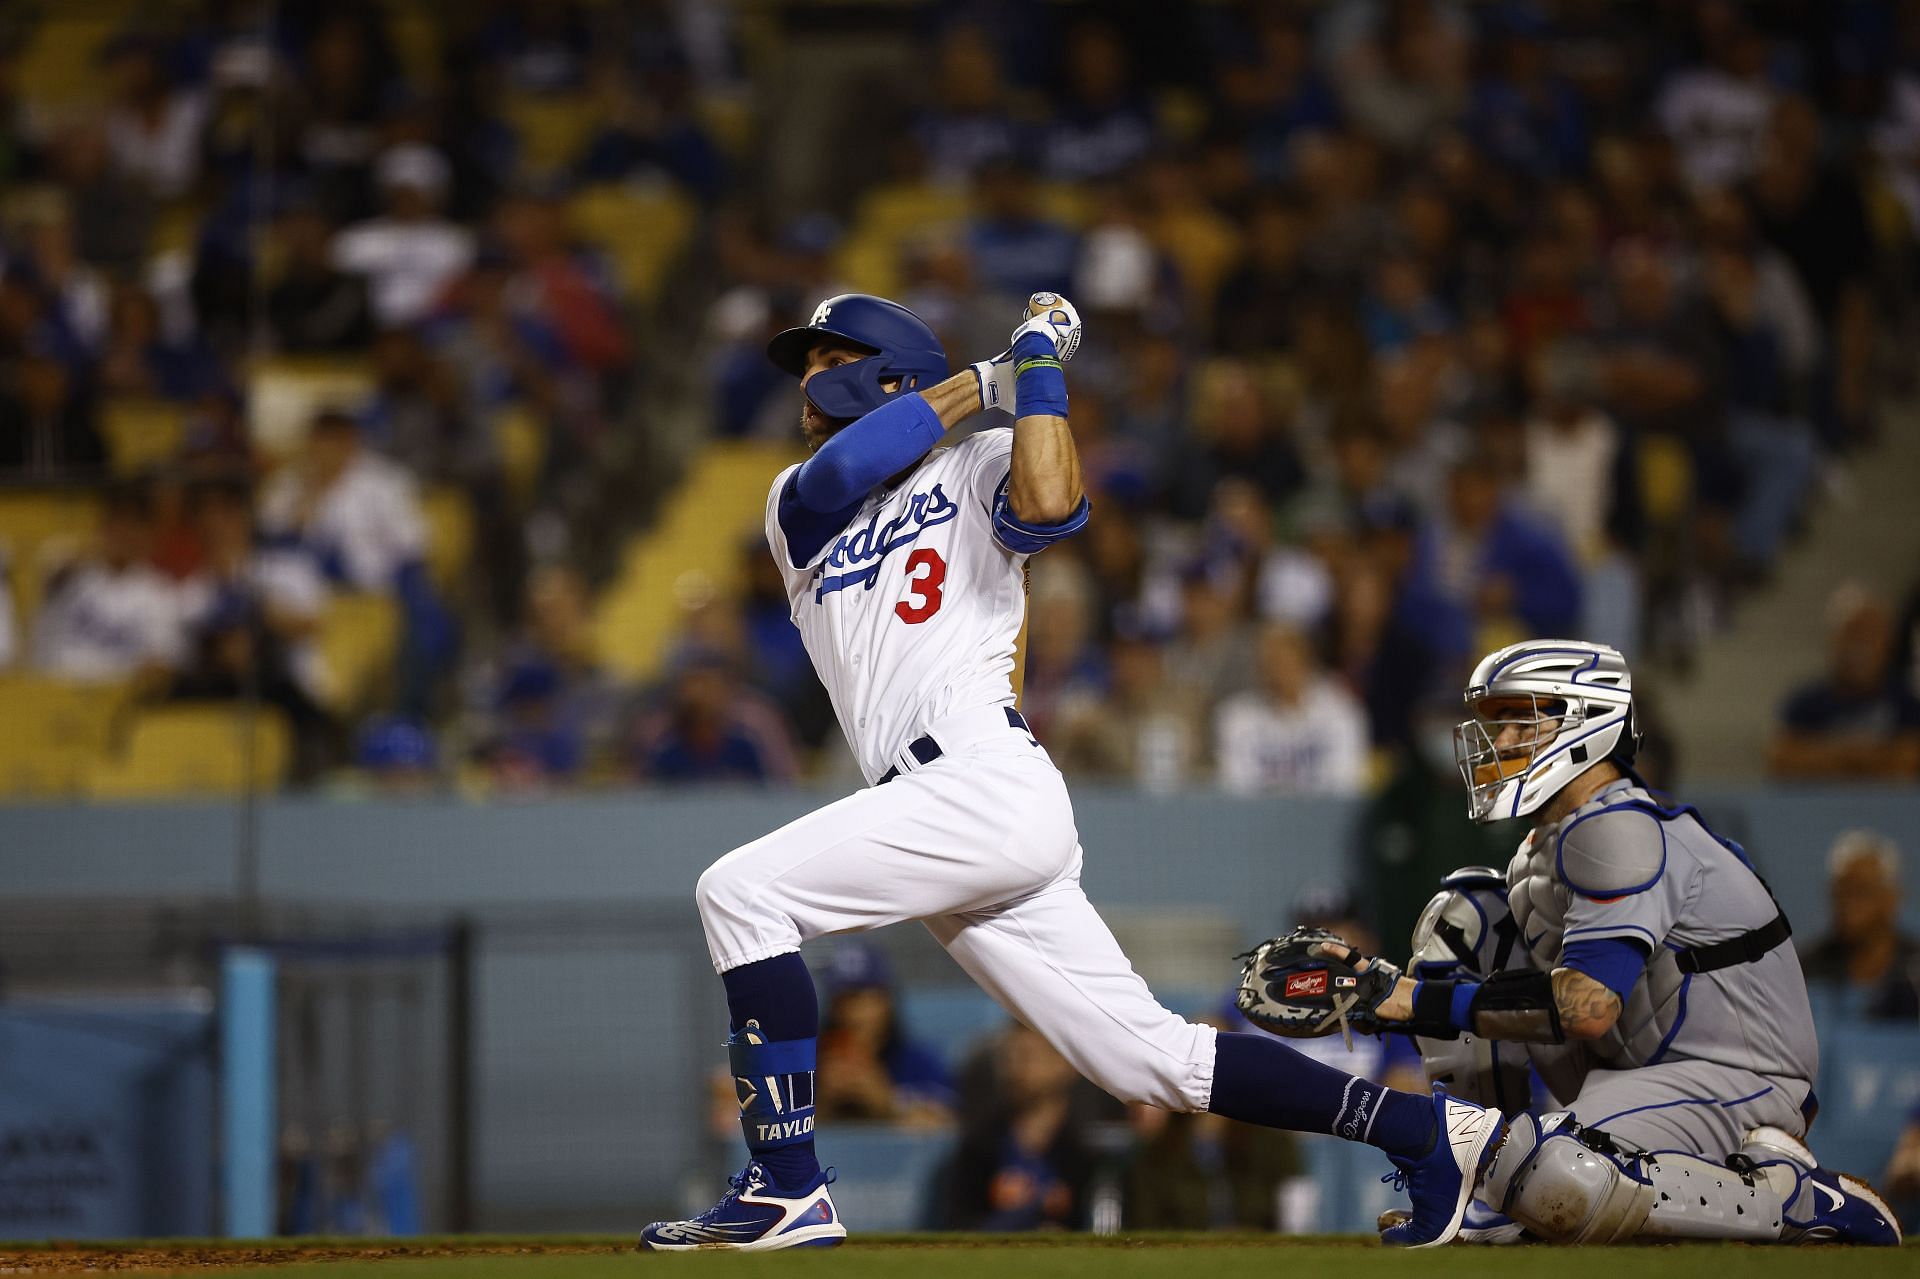 Chris Taylor bats for the Los Angeles Dodgers.